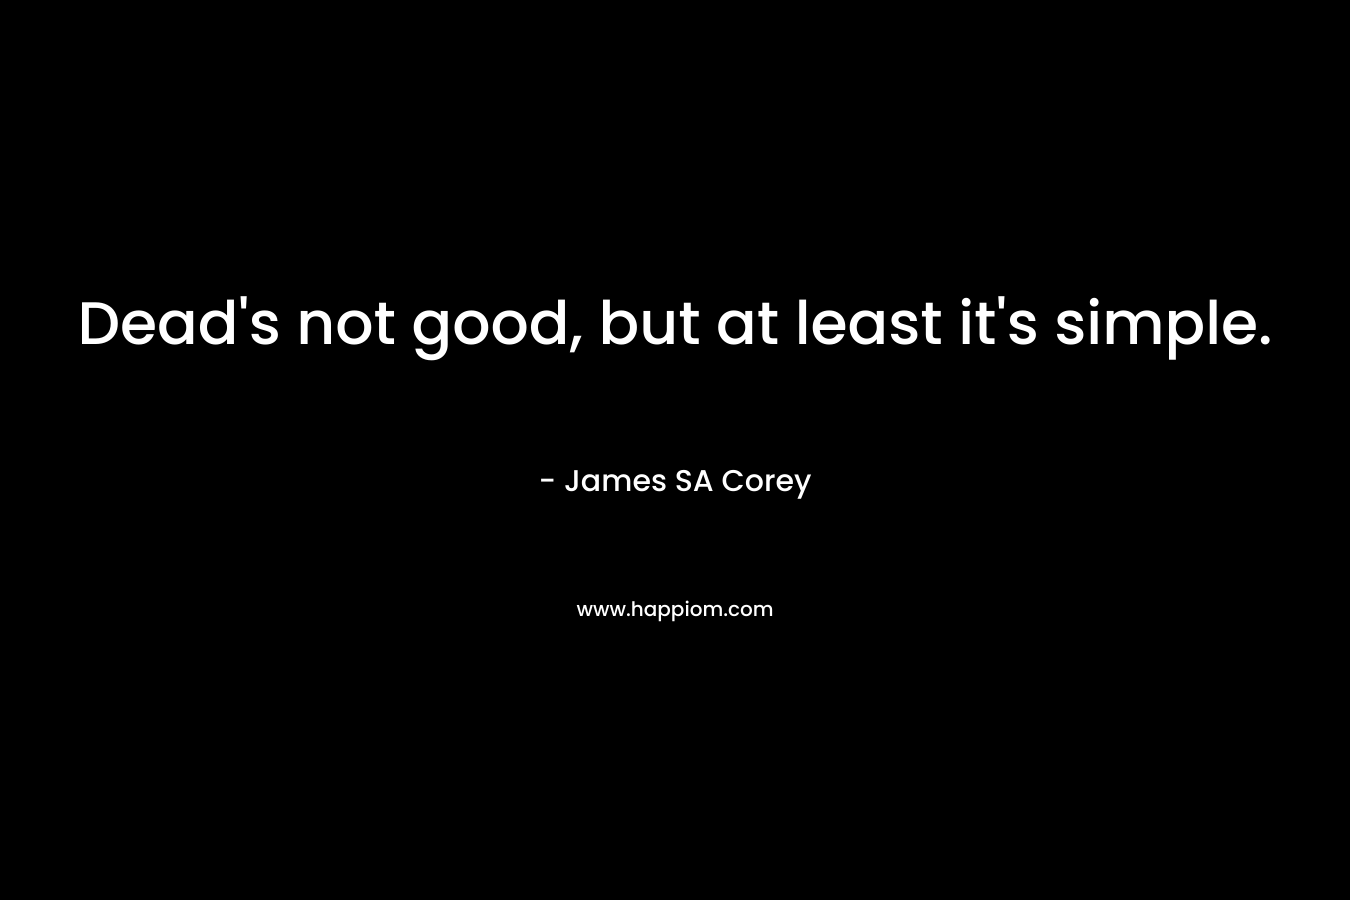 Dead’s not good, but at least it’s simple. – James SA Corey